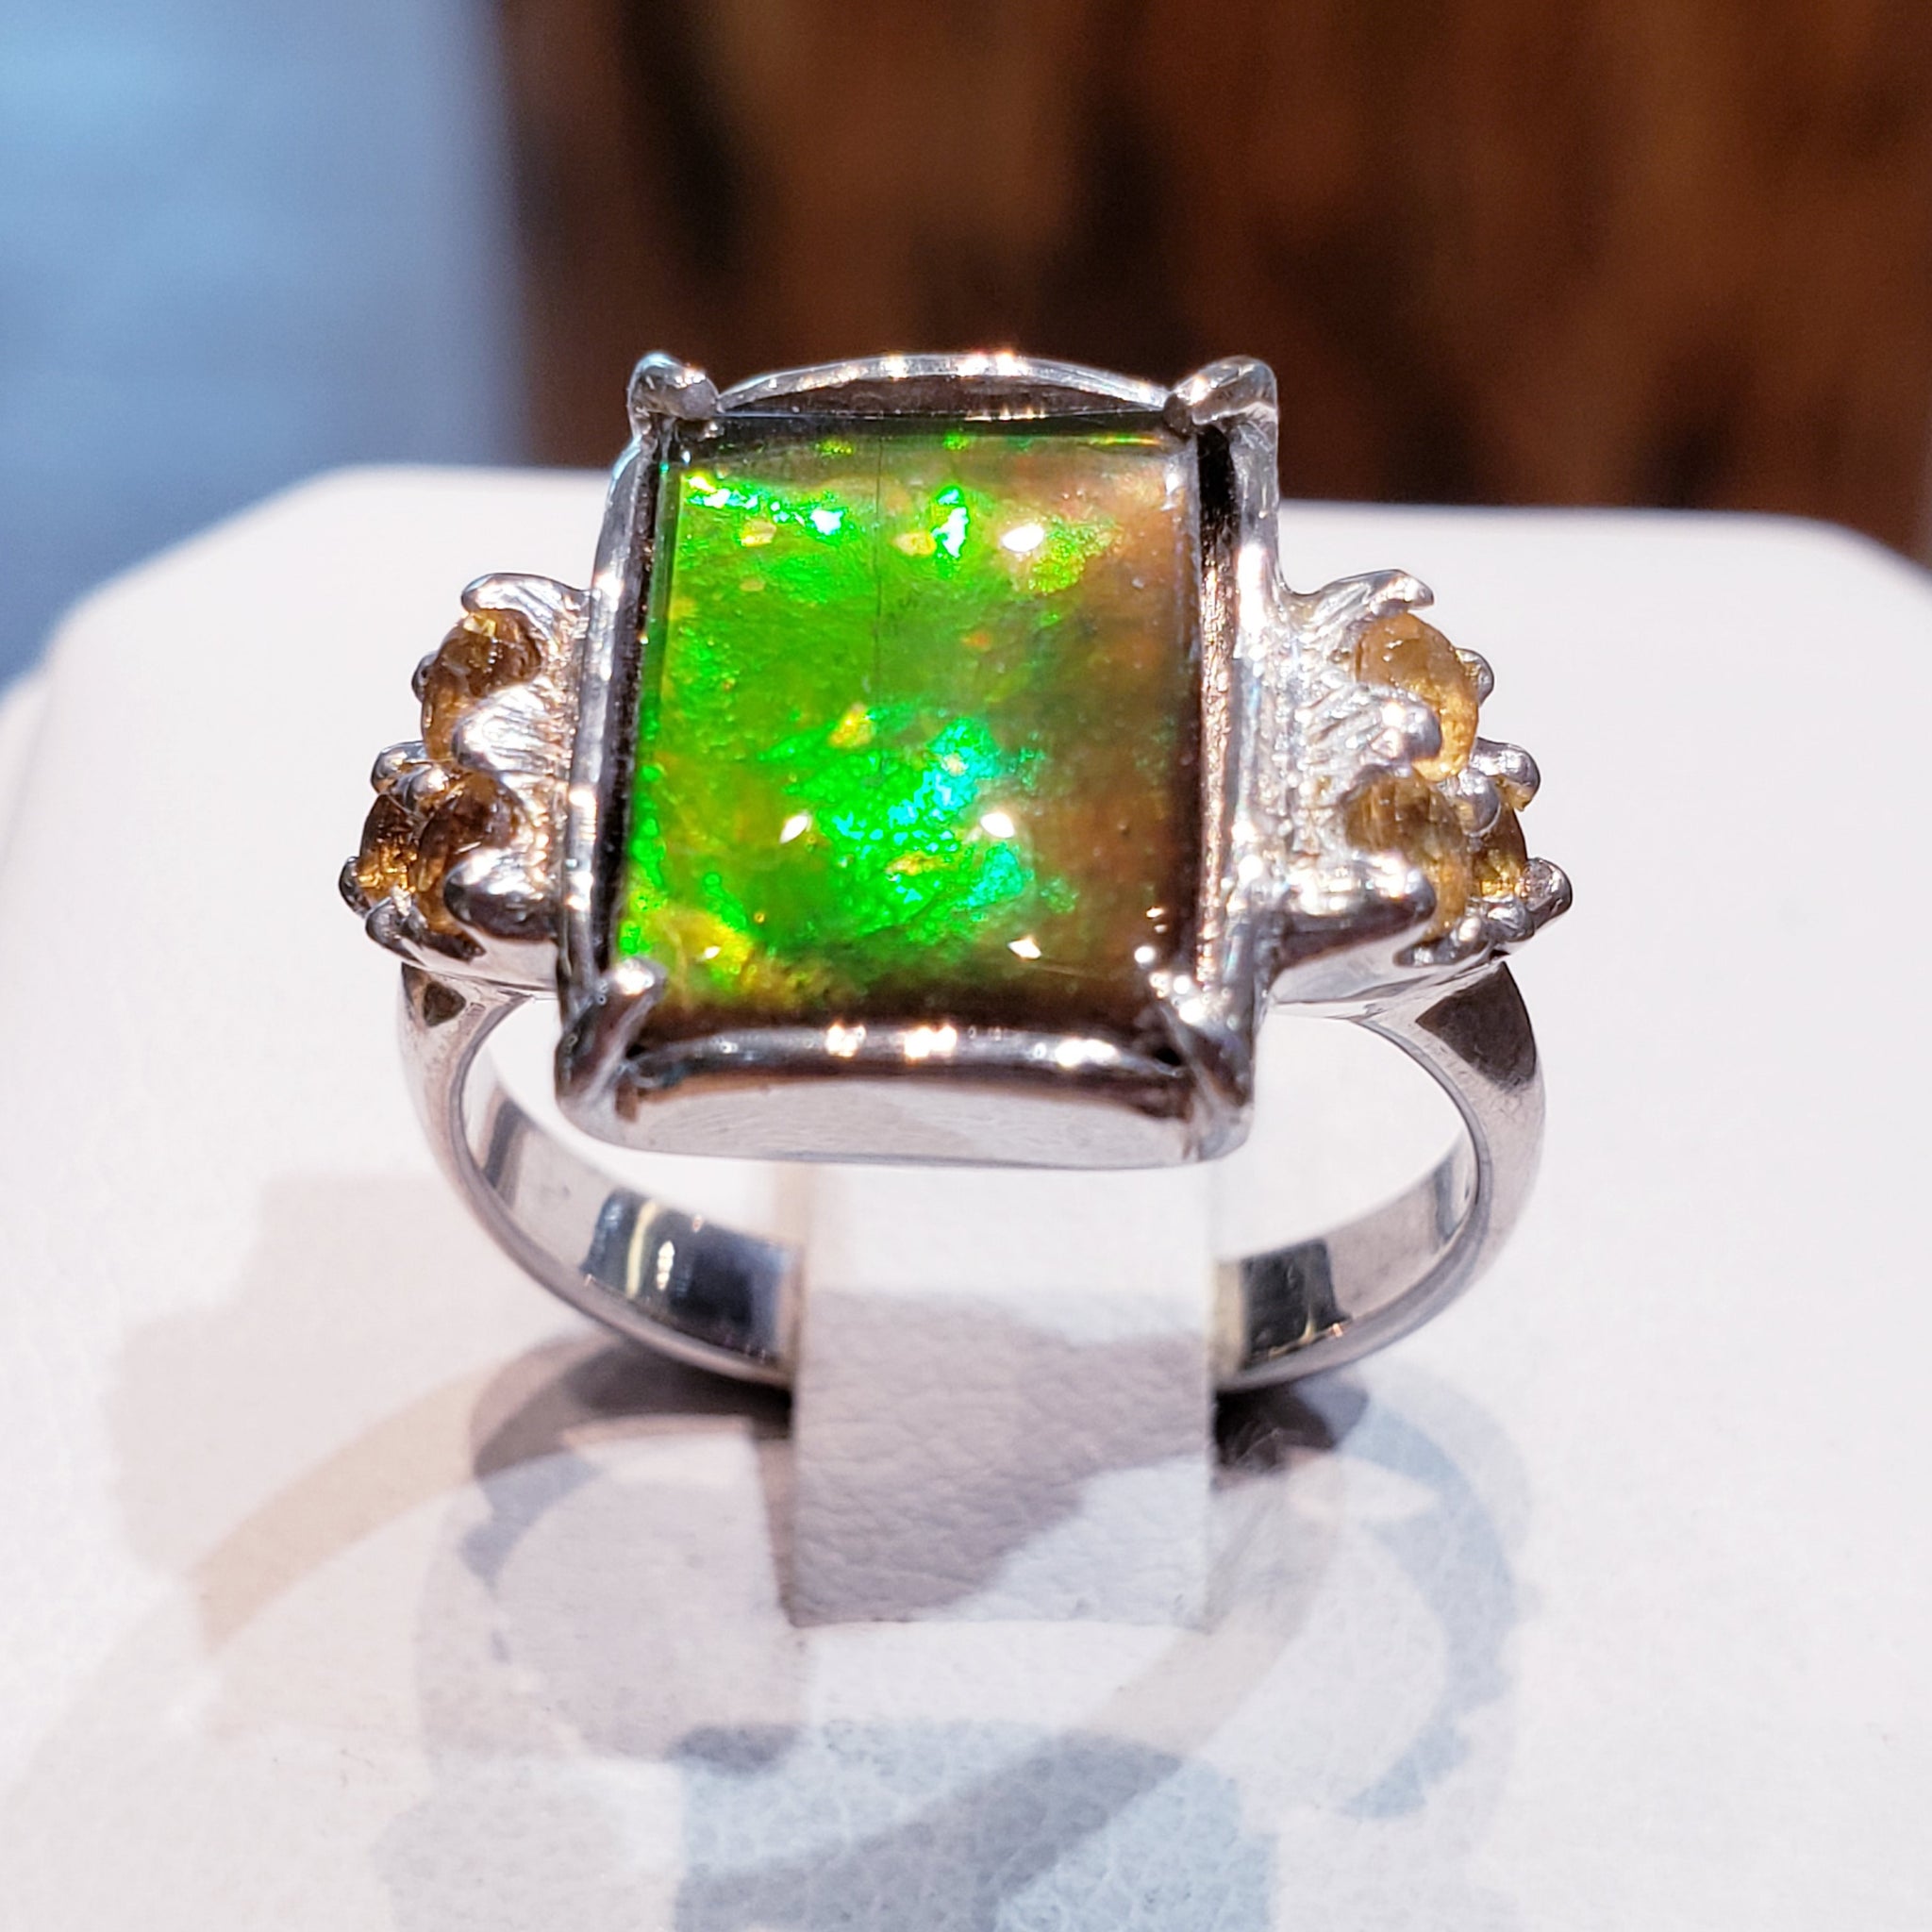 Ammolite Ring With Six Citrines Accent Stones Set in Silver PN: E20321 %product from Empire Ammolite